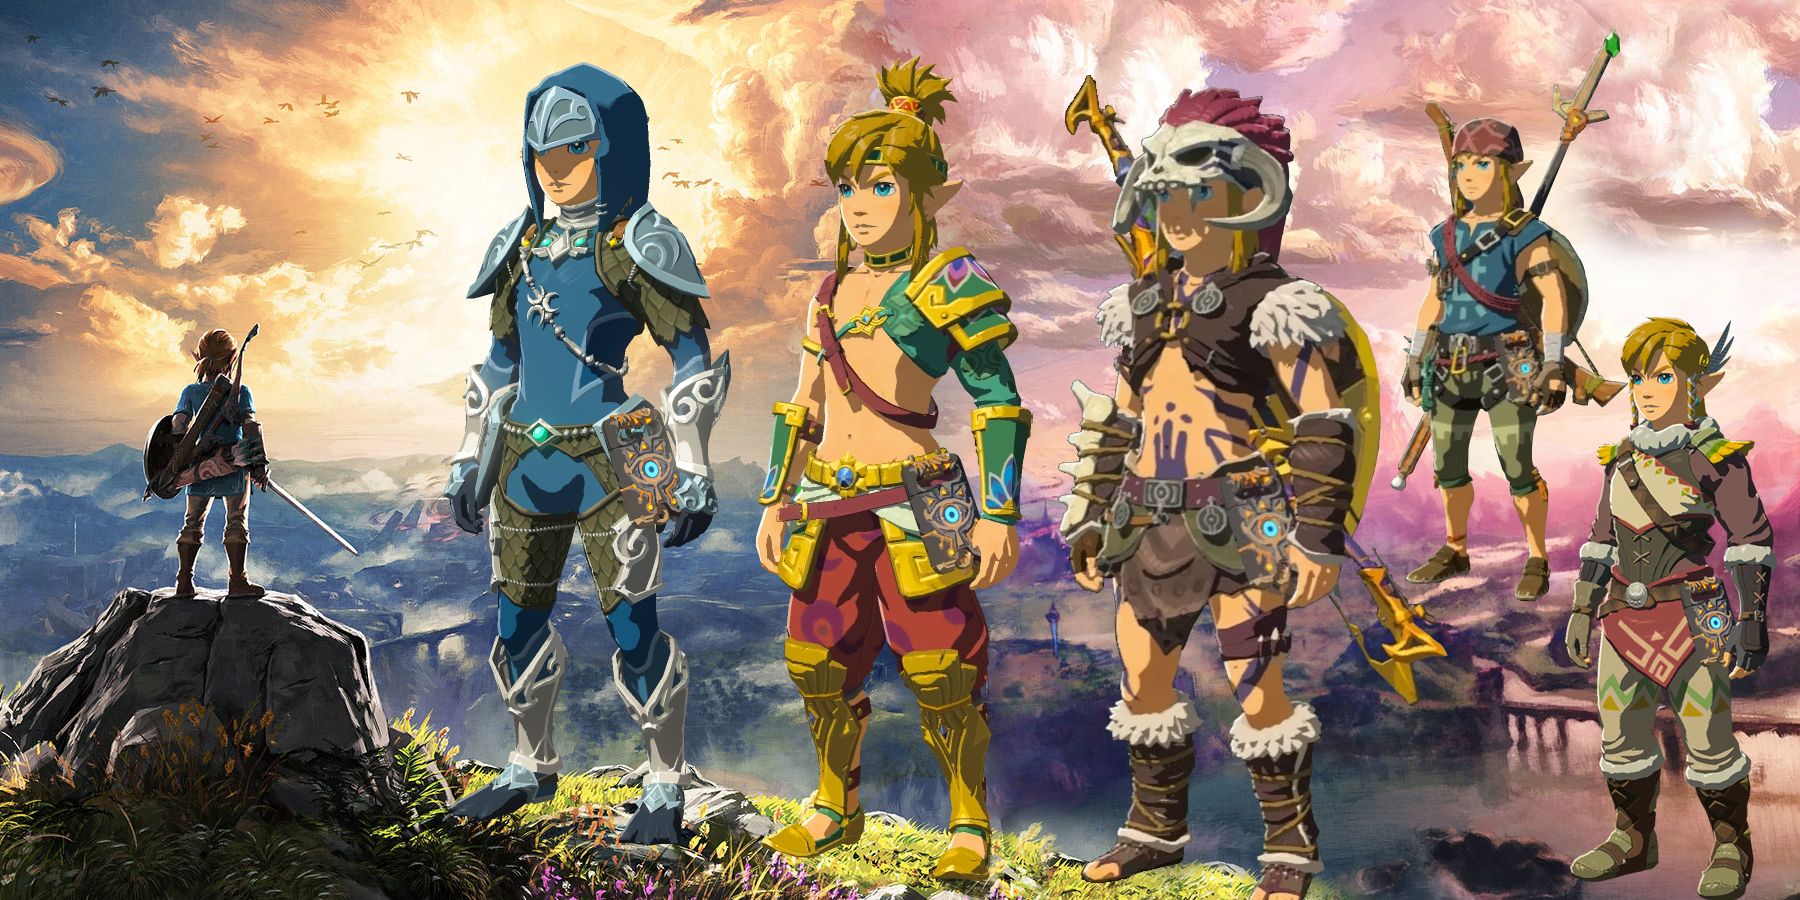 Zora set, Barbarian Set, climbiing set, Desert Voe Set, Snowquill set are among the Best Armor Sets In Zelda: Breath of the Wild